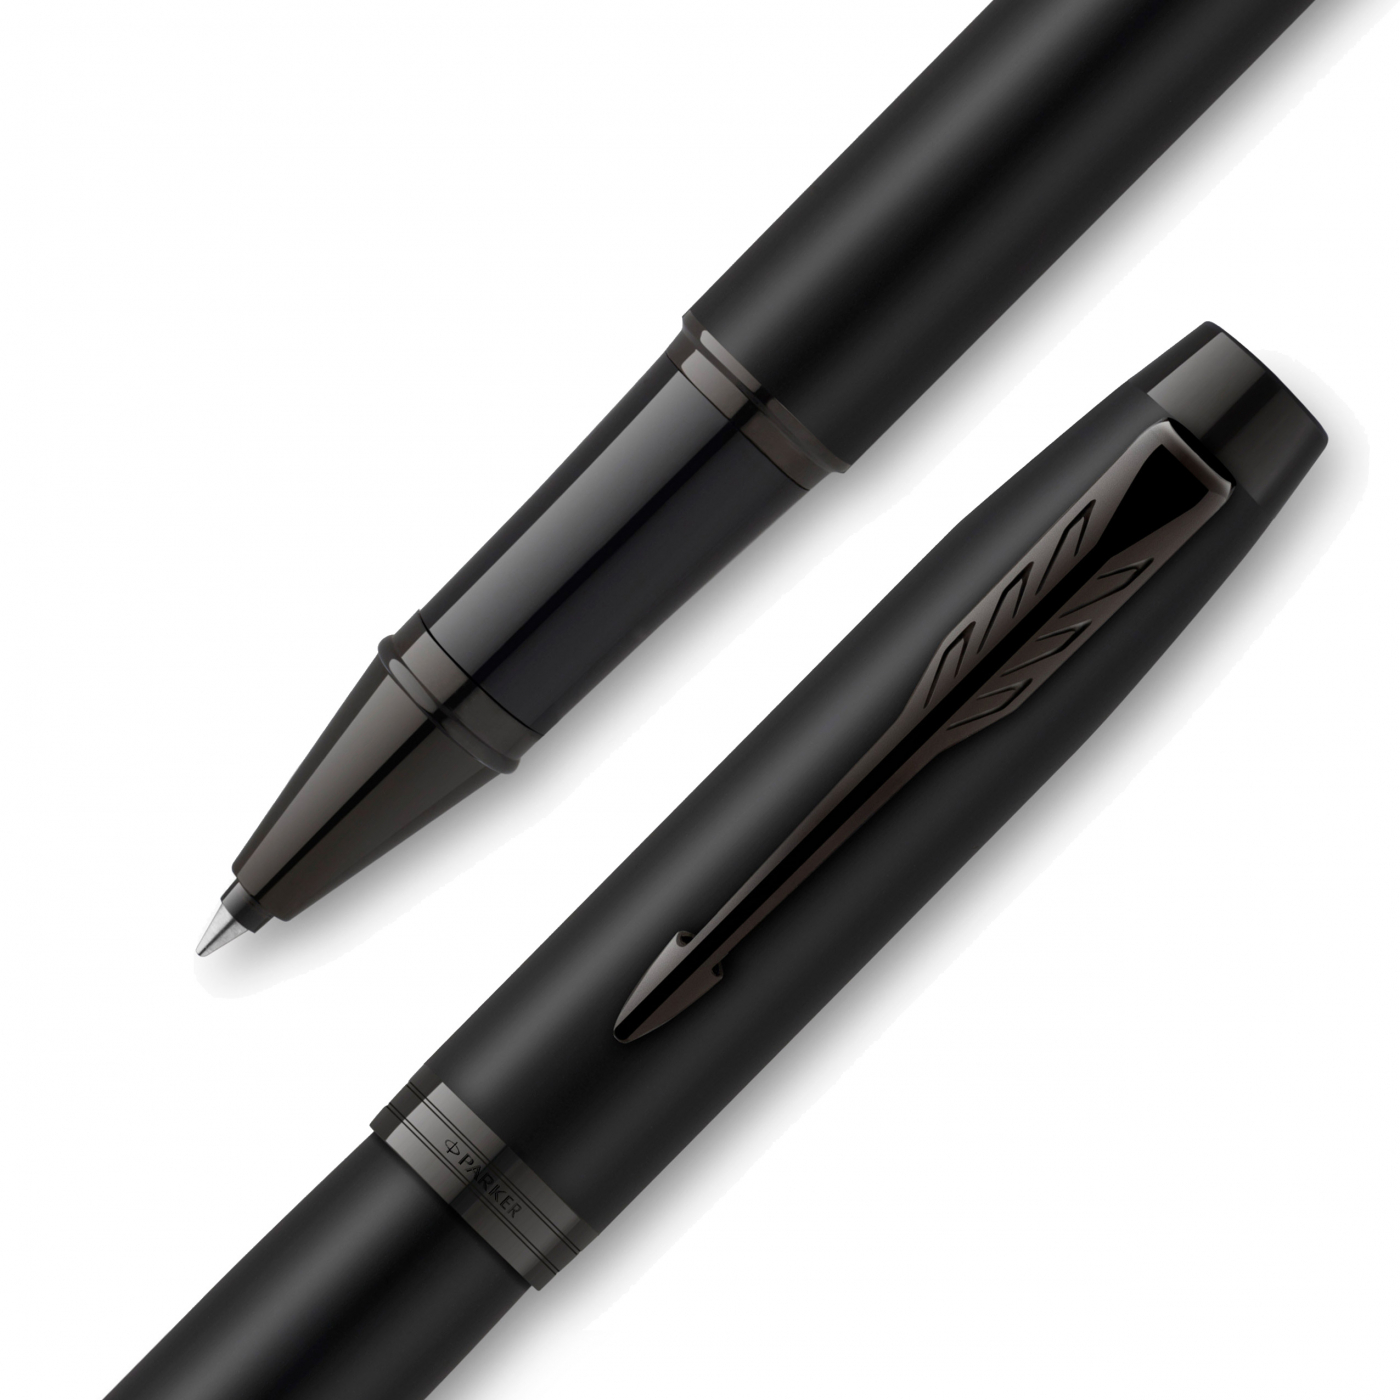 IM Achromatic Black Rollerball in the group Pens / Fine Writing / Rollerball Pens at Pen Store (111900)